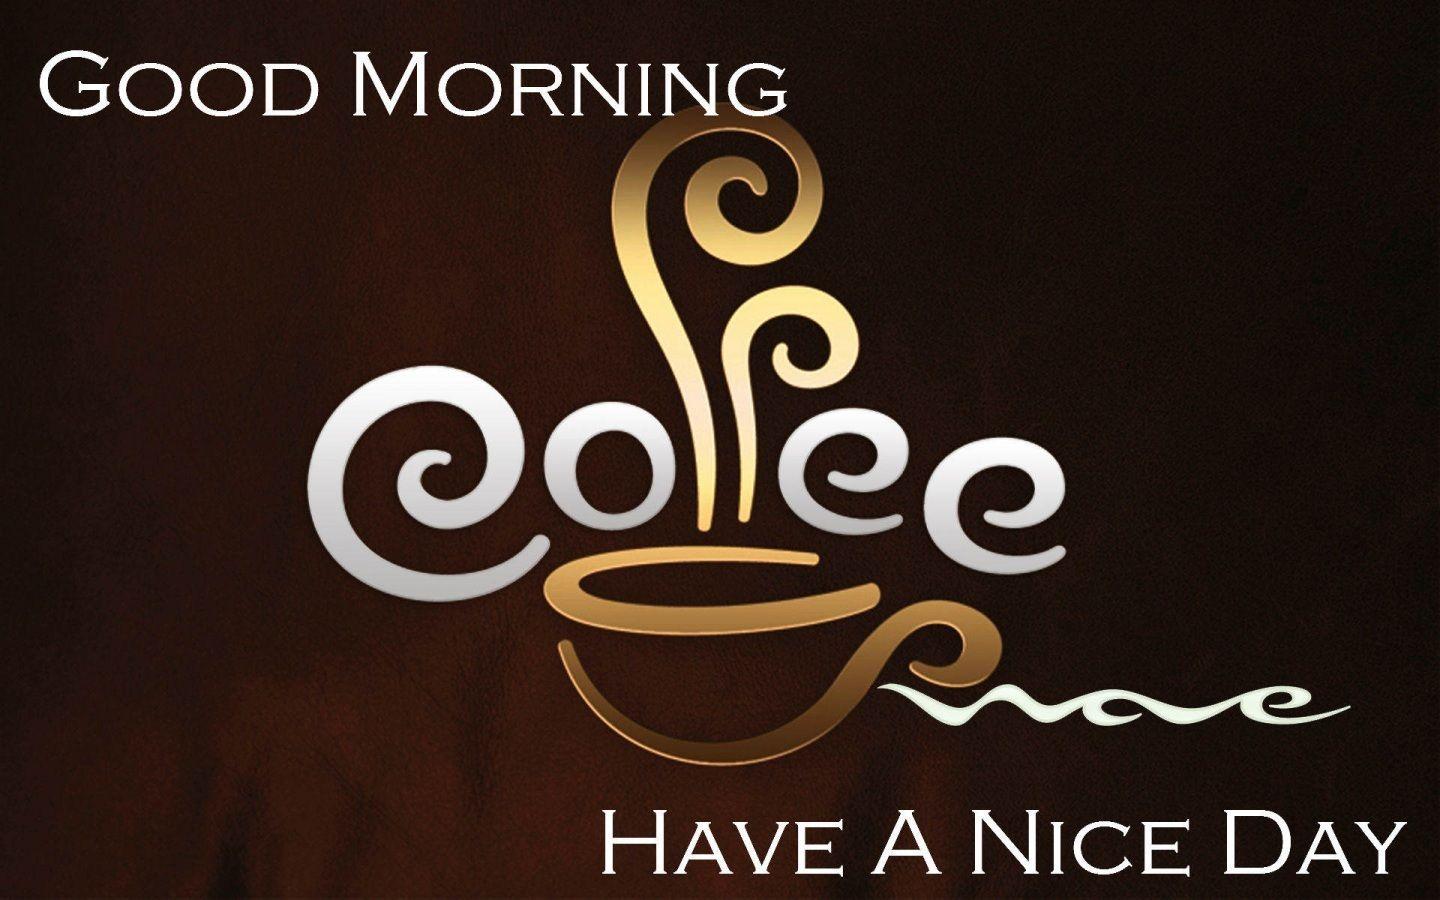 Good Morning Have Nice Day Coffee Picture Quotes. Caffeine